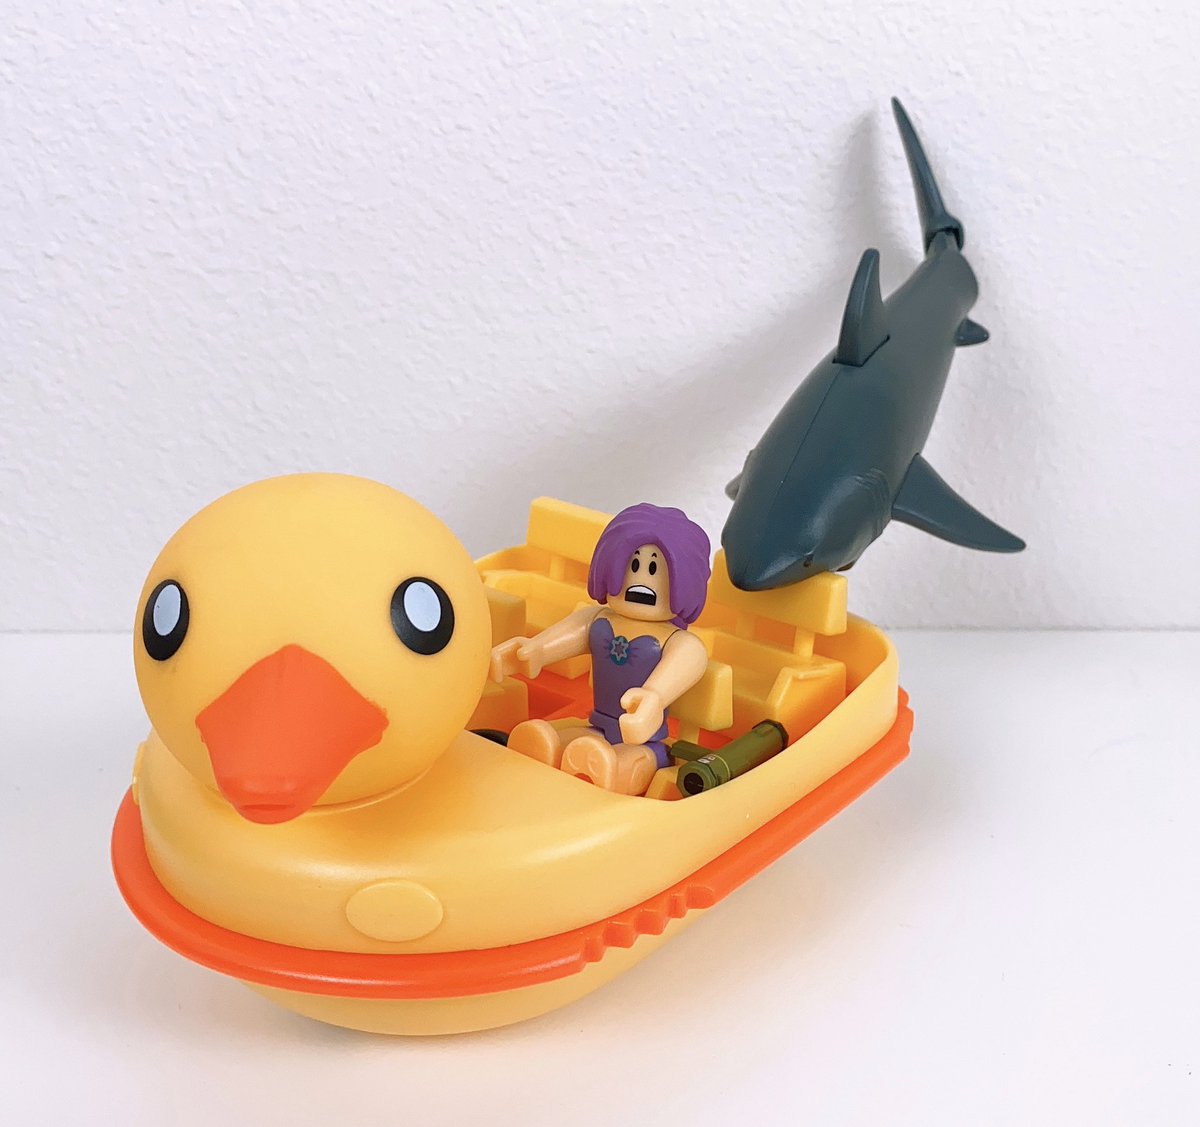 Dollastic On Twitter I Ve Spent Some Time Logging My Collection And Finally Unboxed Roblox Sharkbite By Simonblox Playset This Is Not Only One Of My Fav Games On Roblox But Also One - roblox duck boat